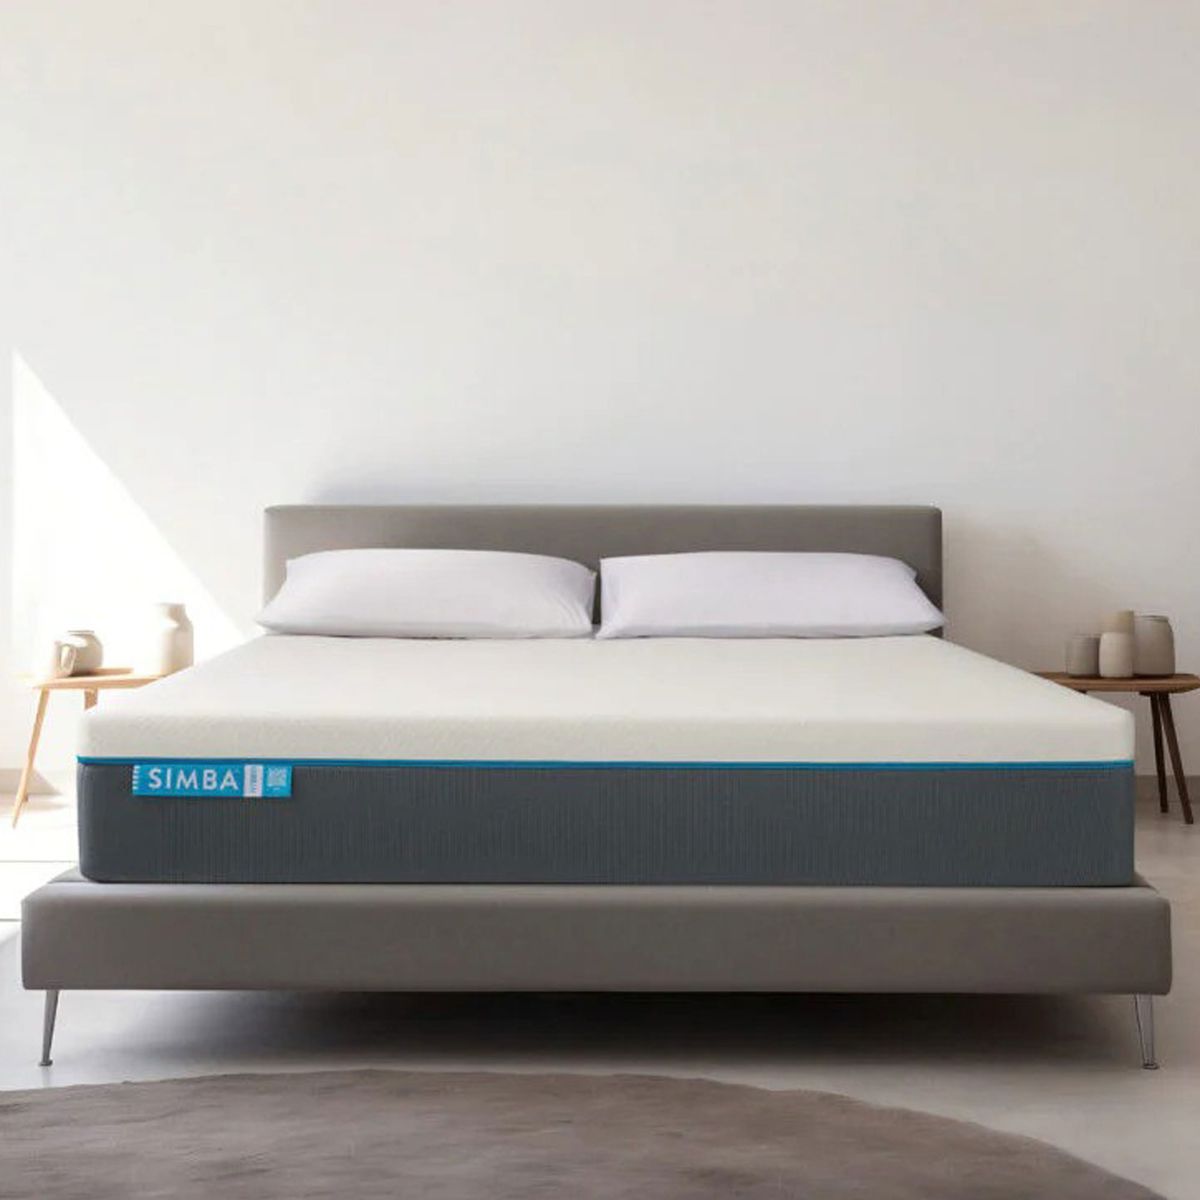 Our top-rated mattress is currently on sale at a discount of over £200 – it's the best price we've seen for it in months